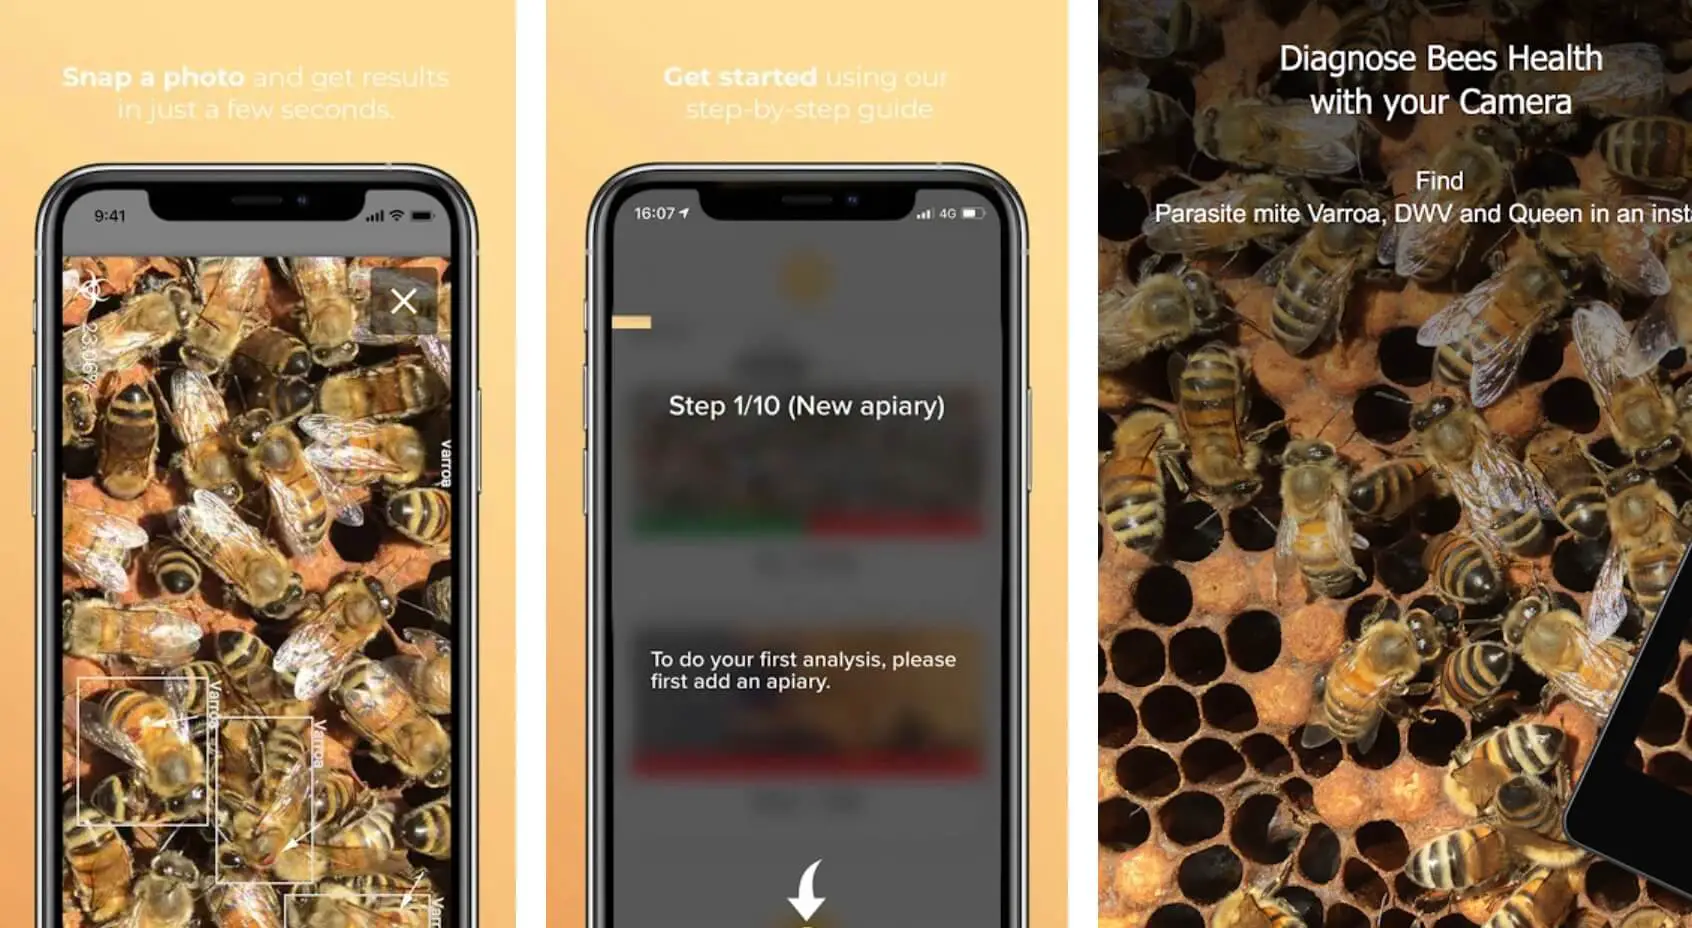 11 Best Beekeeping Apps For Android and iOS Devices